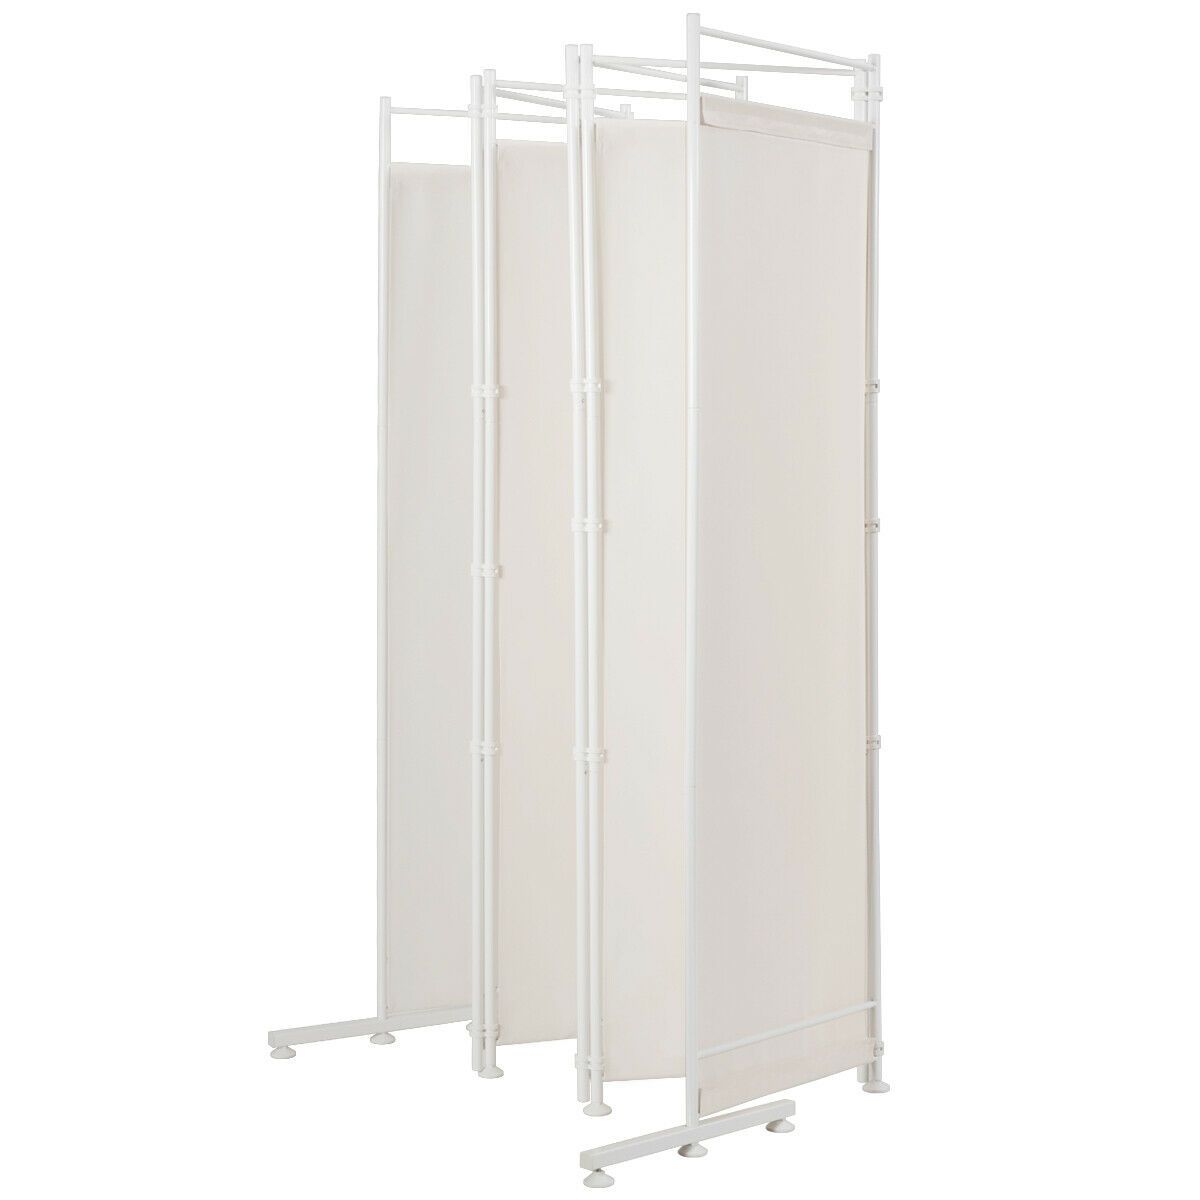 6-Panel Room Divider with Adjustable Foot Pads